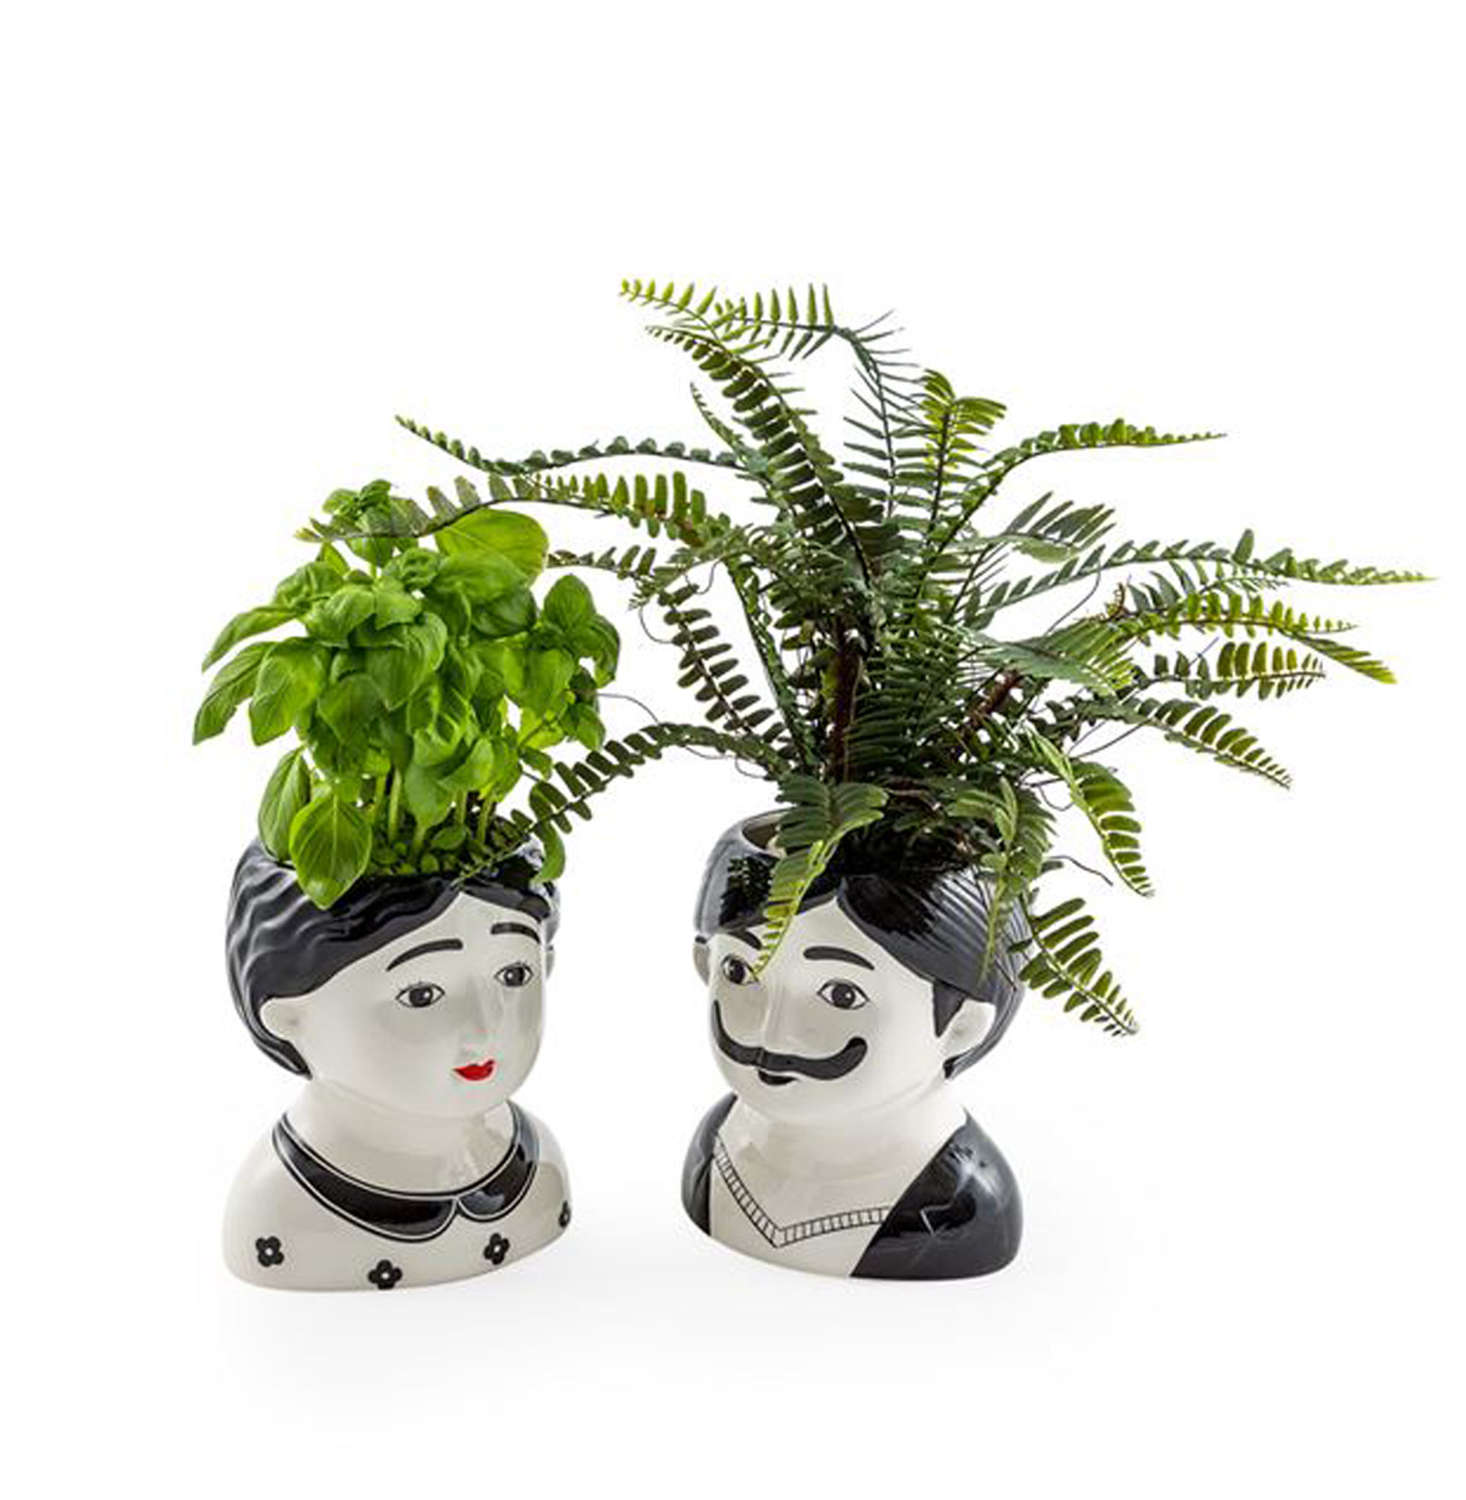 Black and white Man and Woman ceramic pots